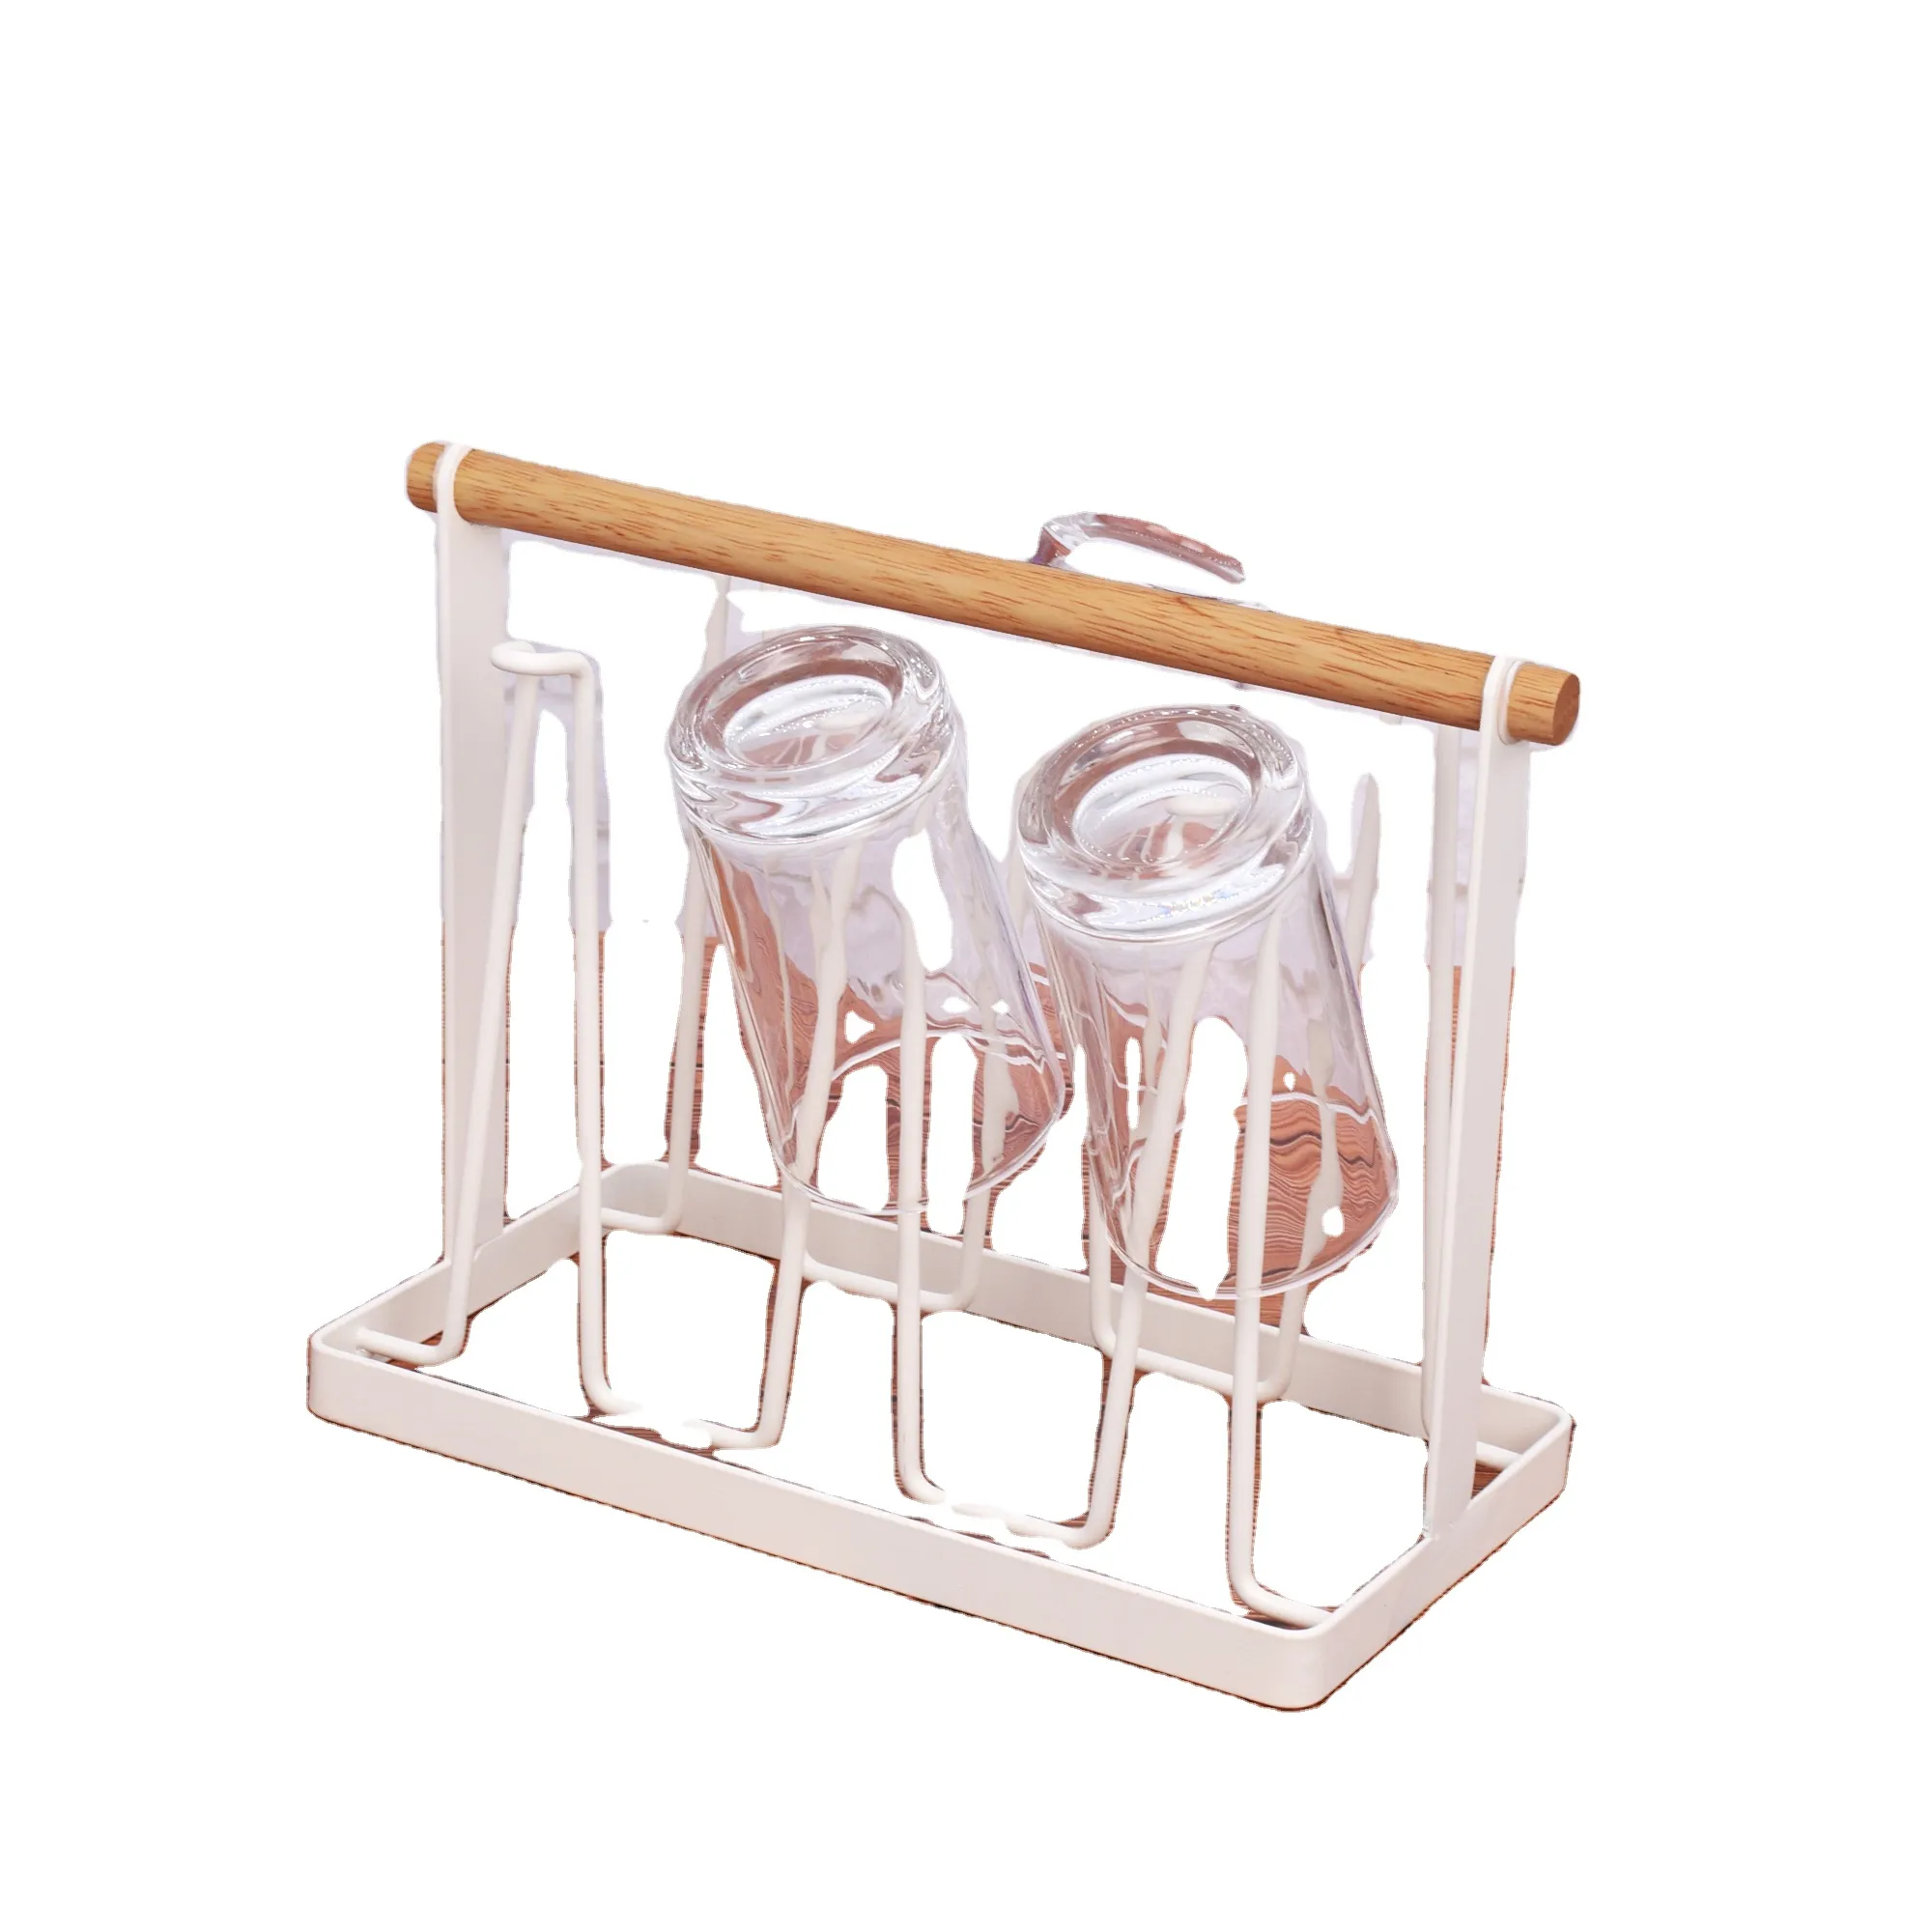 Dish Rack Organize Metal And Wooden Home Tableware Storage Cup Holder Customized Color For Home Kitchen Glass Cup Shelf